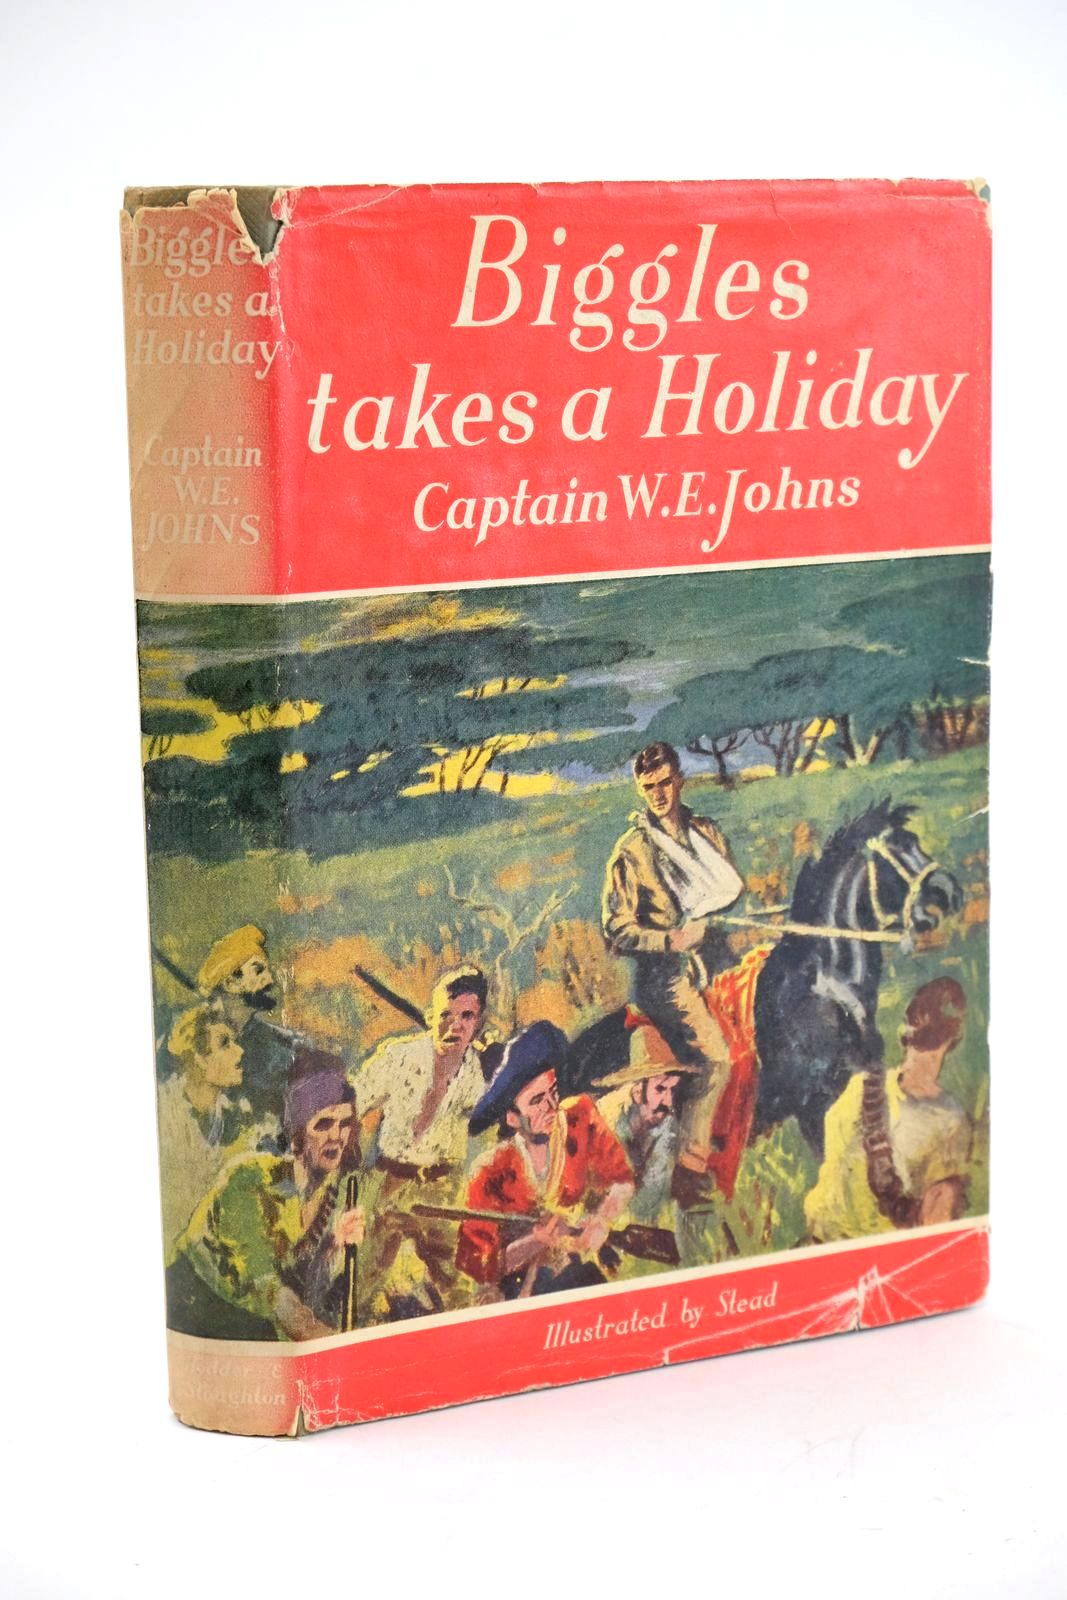 Photo of BIGGLES TAKES A HOLIDAY written by Johns, W.E. illustrated by Stead,  published by Hodder &amp; Stoughton (STOCK CODE: 1324031)  for sale by Stella & Rose's Books